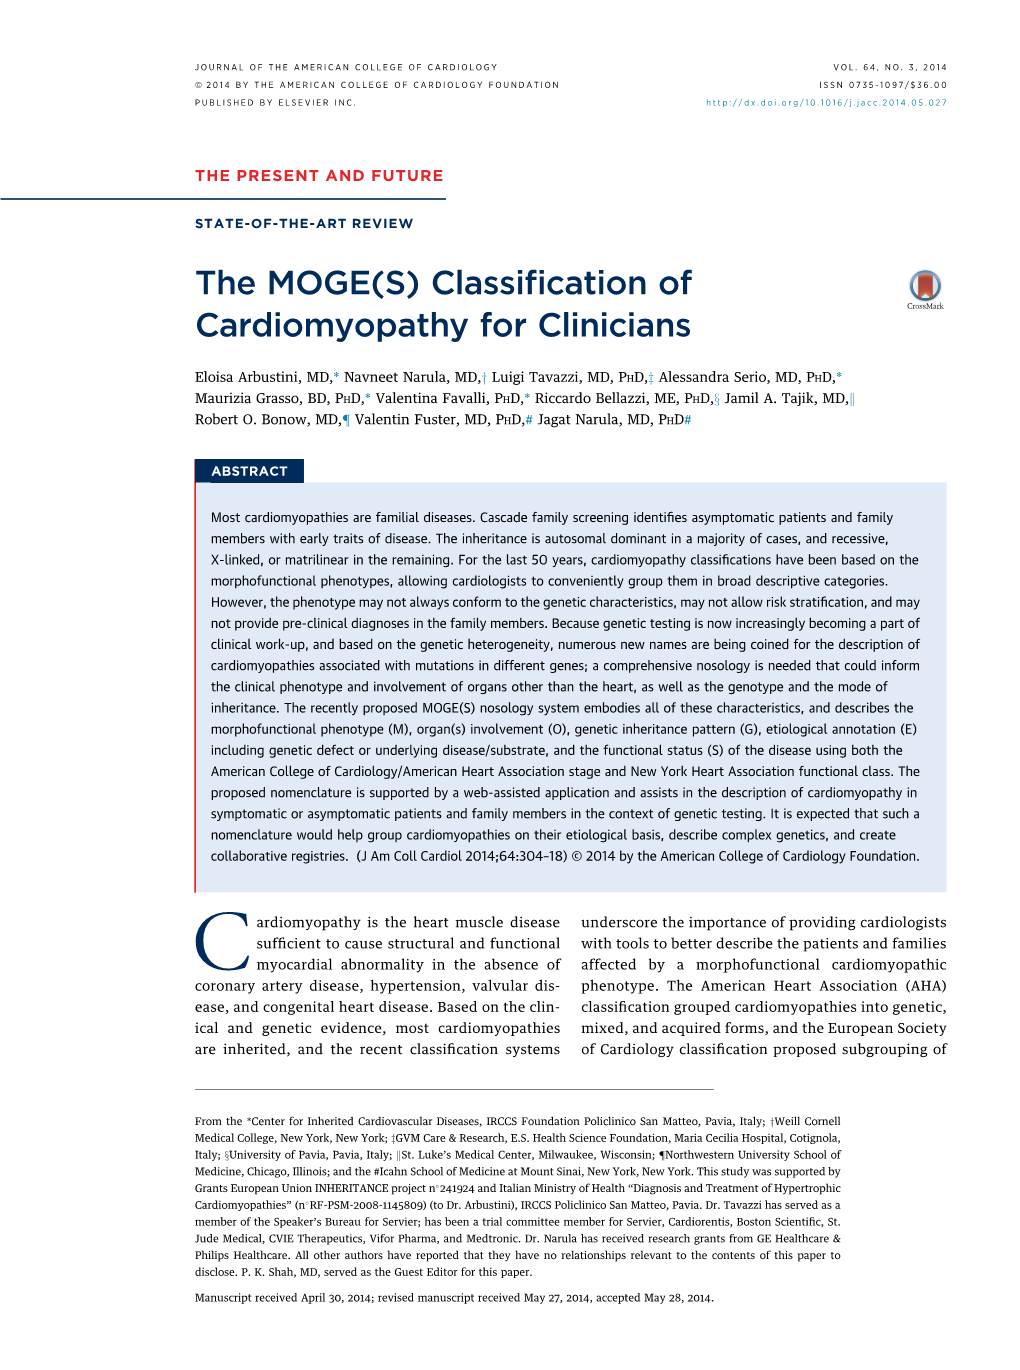 The MOGE(S) Classification of Cardiomyopathy for Clinicians